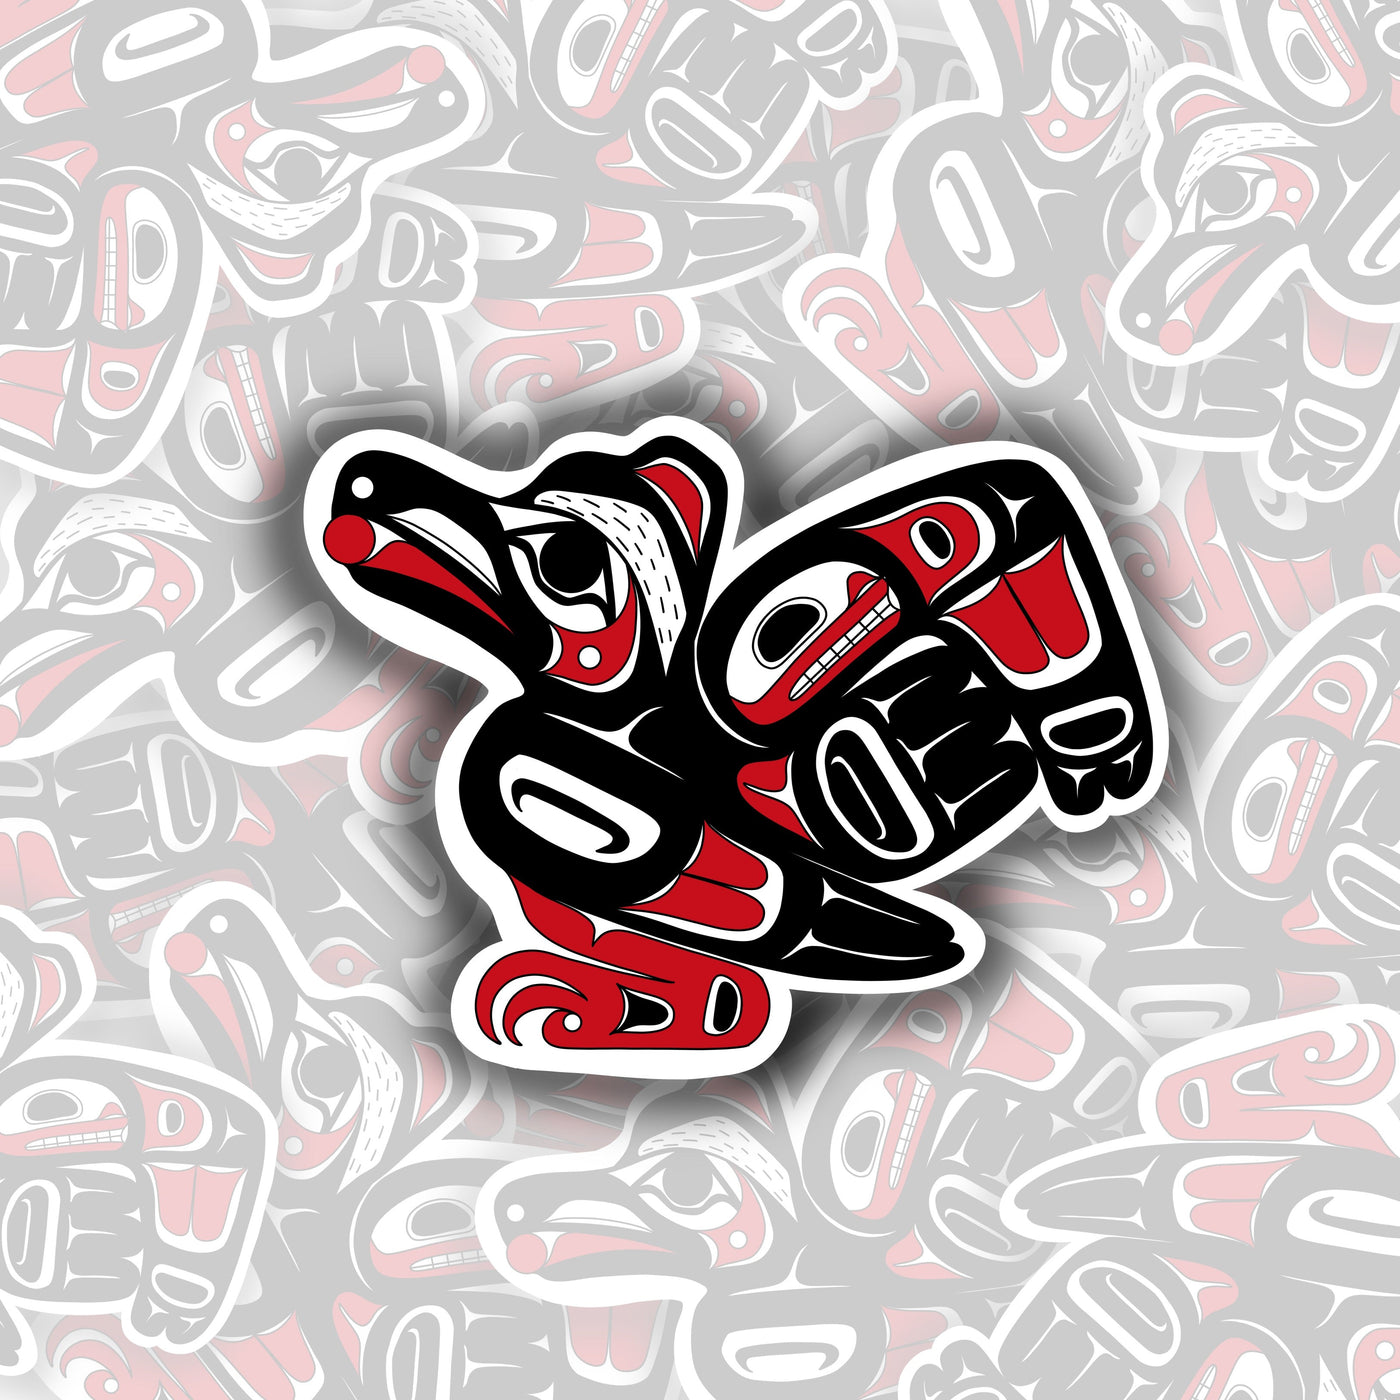 Black raven with red accents on the wing, body, face, and feet. inside of the raven's mouth is a small red circle representing the sun.